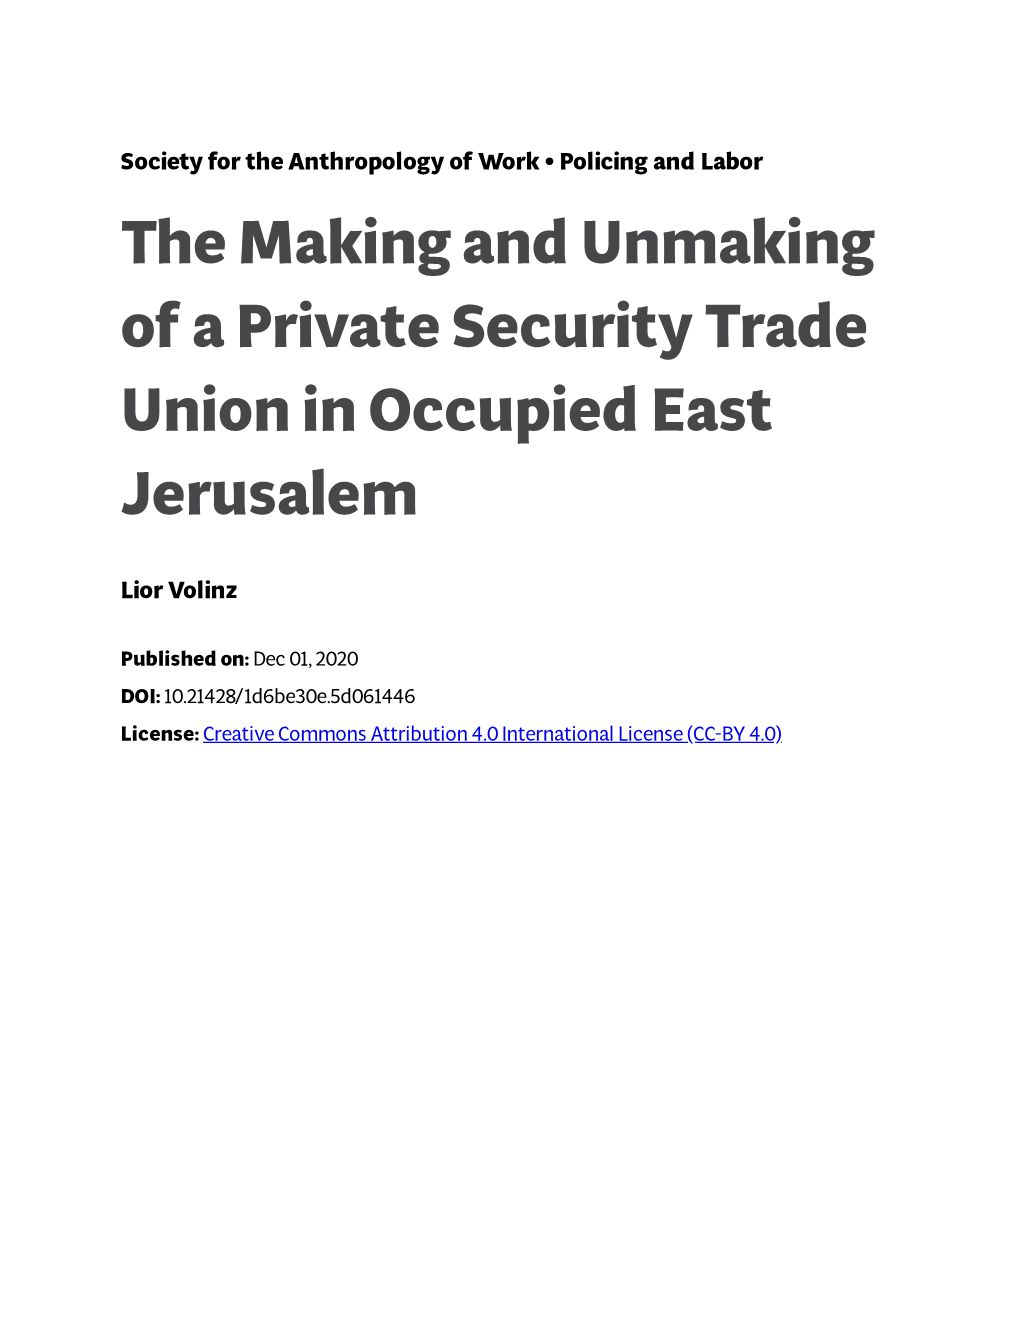 The Making and Unmaking of a Private Security Trade Union in Occupied East Jerusalem